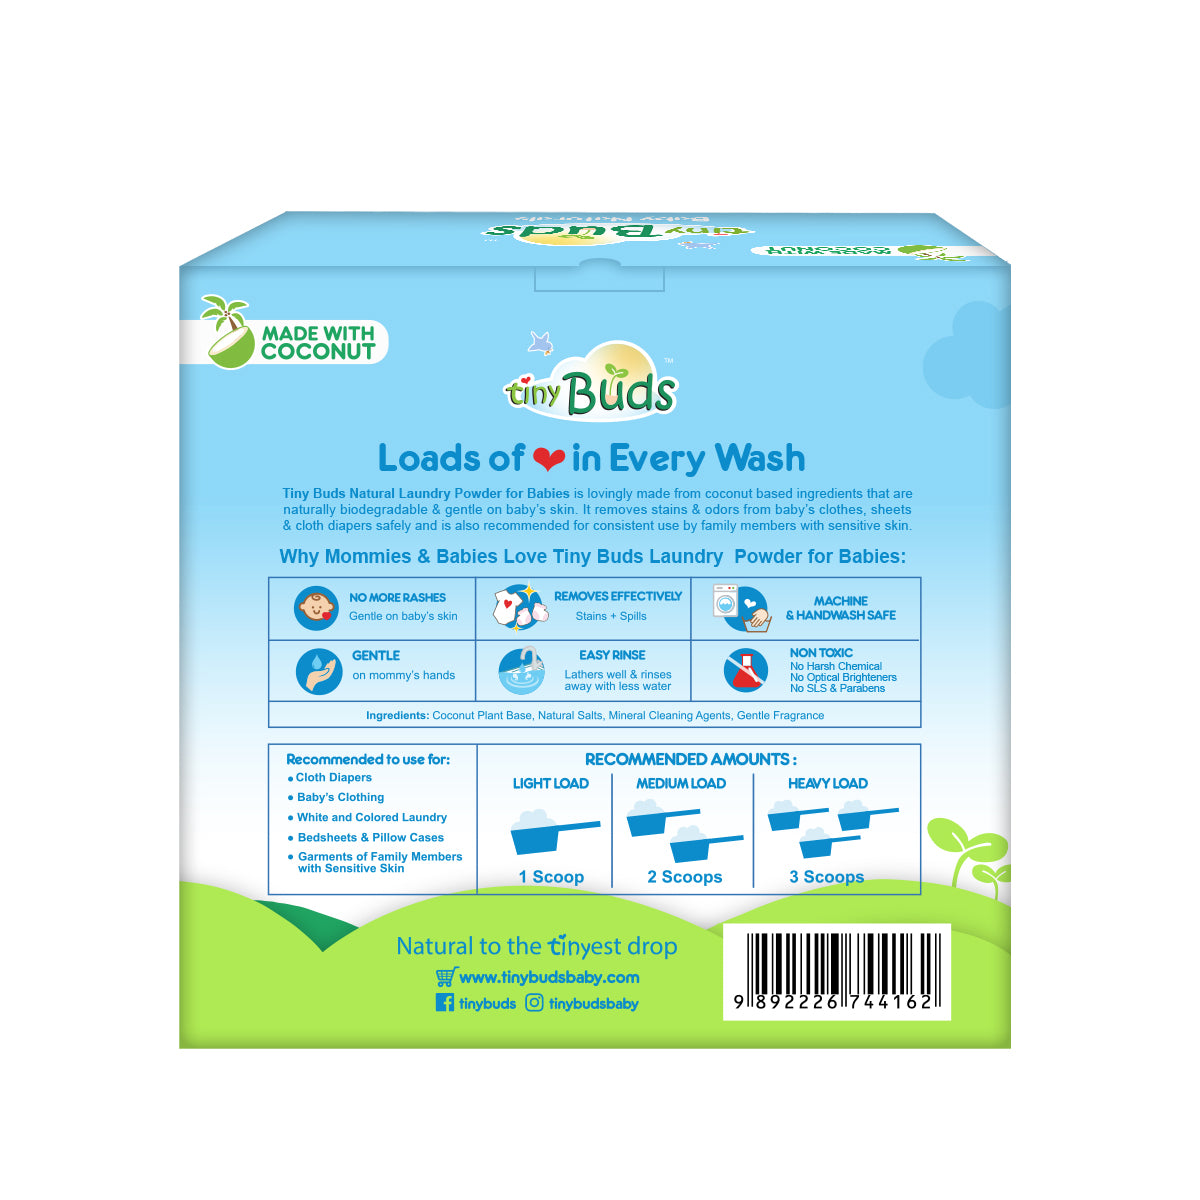 Tiny Buds Natural Laundry Powder for Babies 1KG